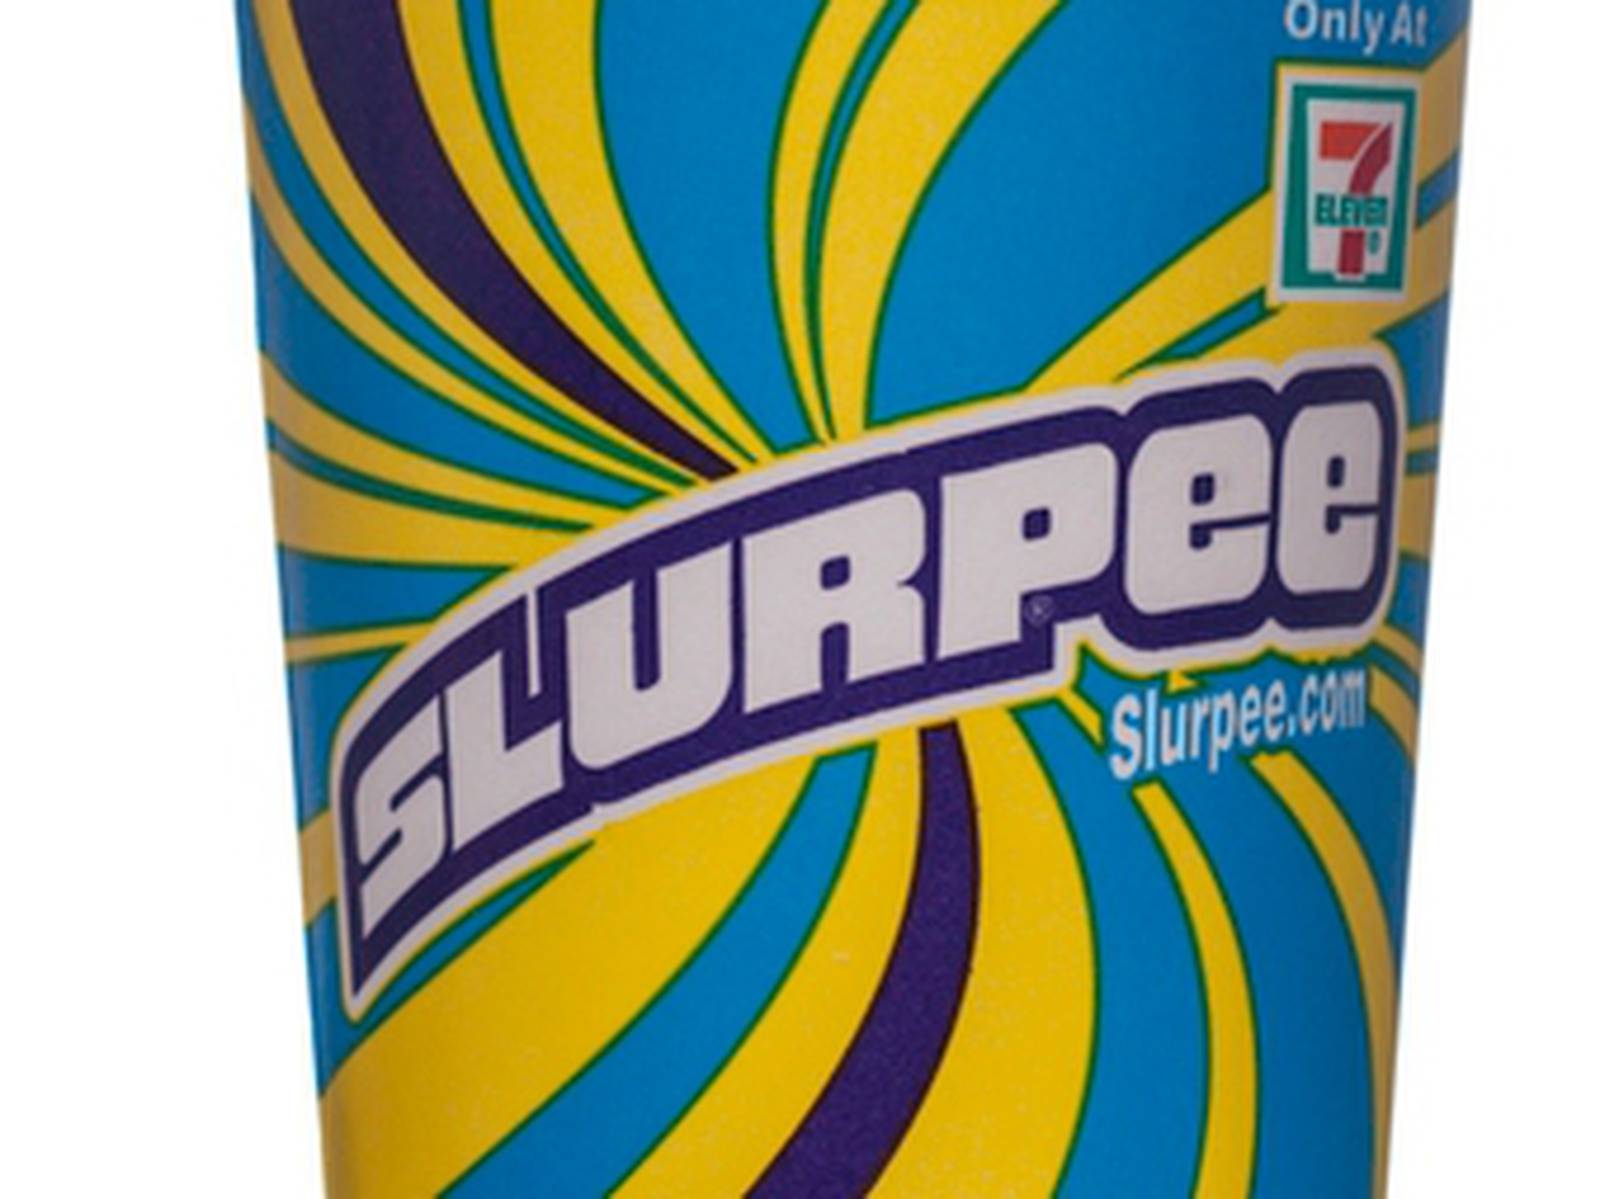 Get a Slurpee deal on ‘Bring Your Own Cup Day’ at 7eleven on Saturday